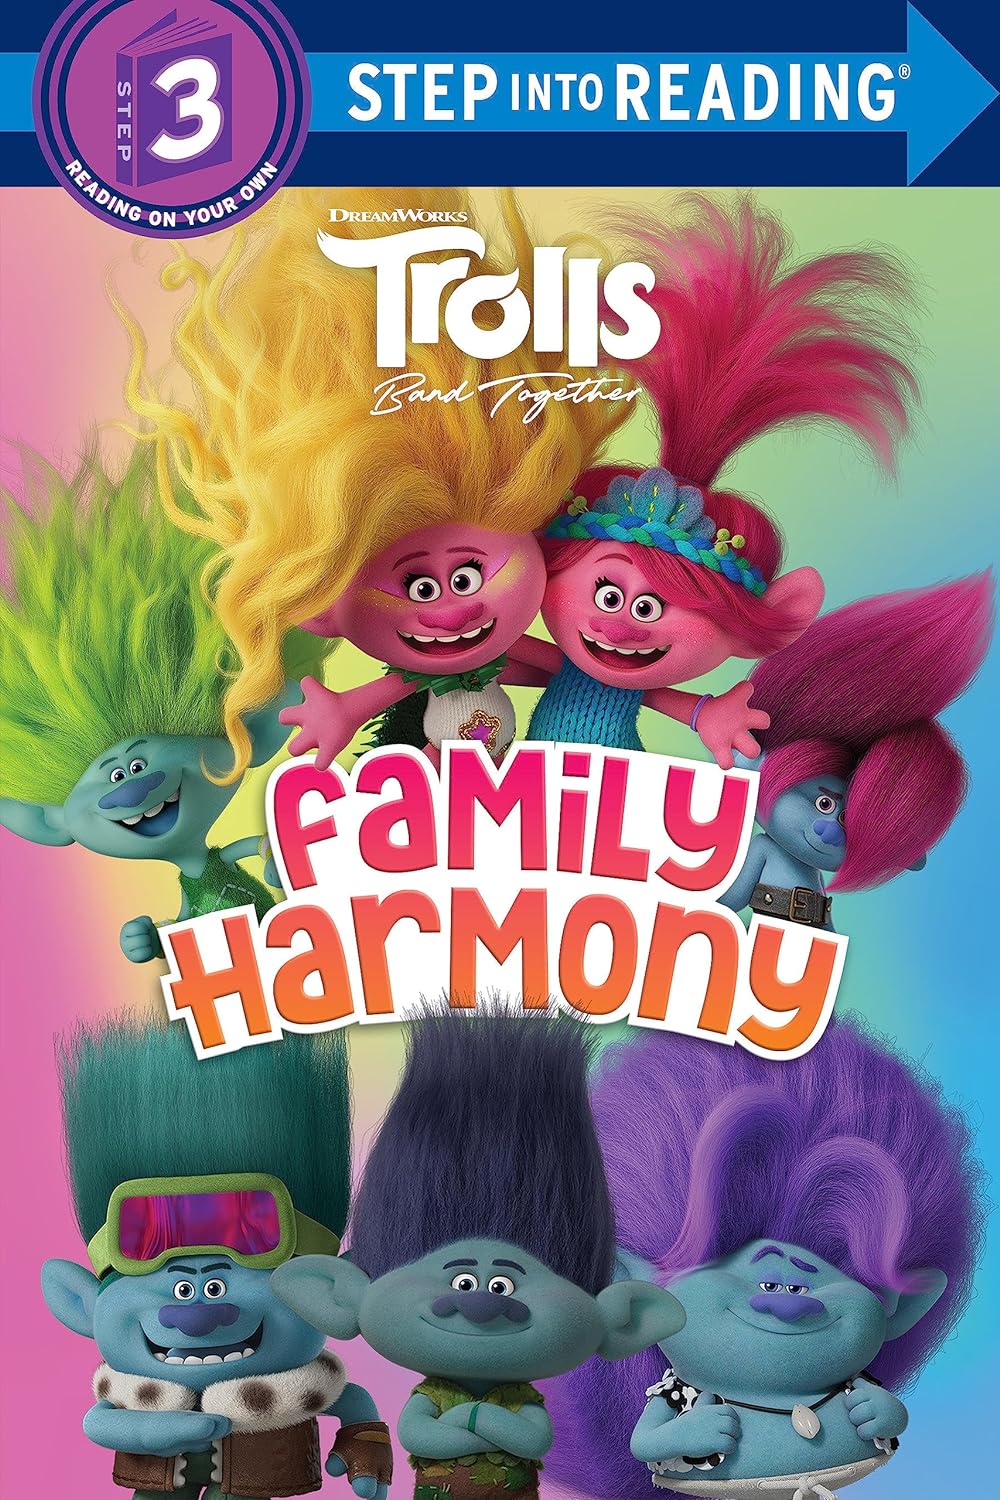 Trolls Band Together Different Books For 2023 Dreamworks Film